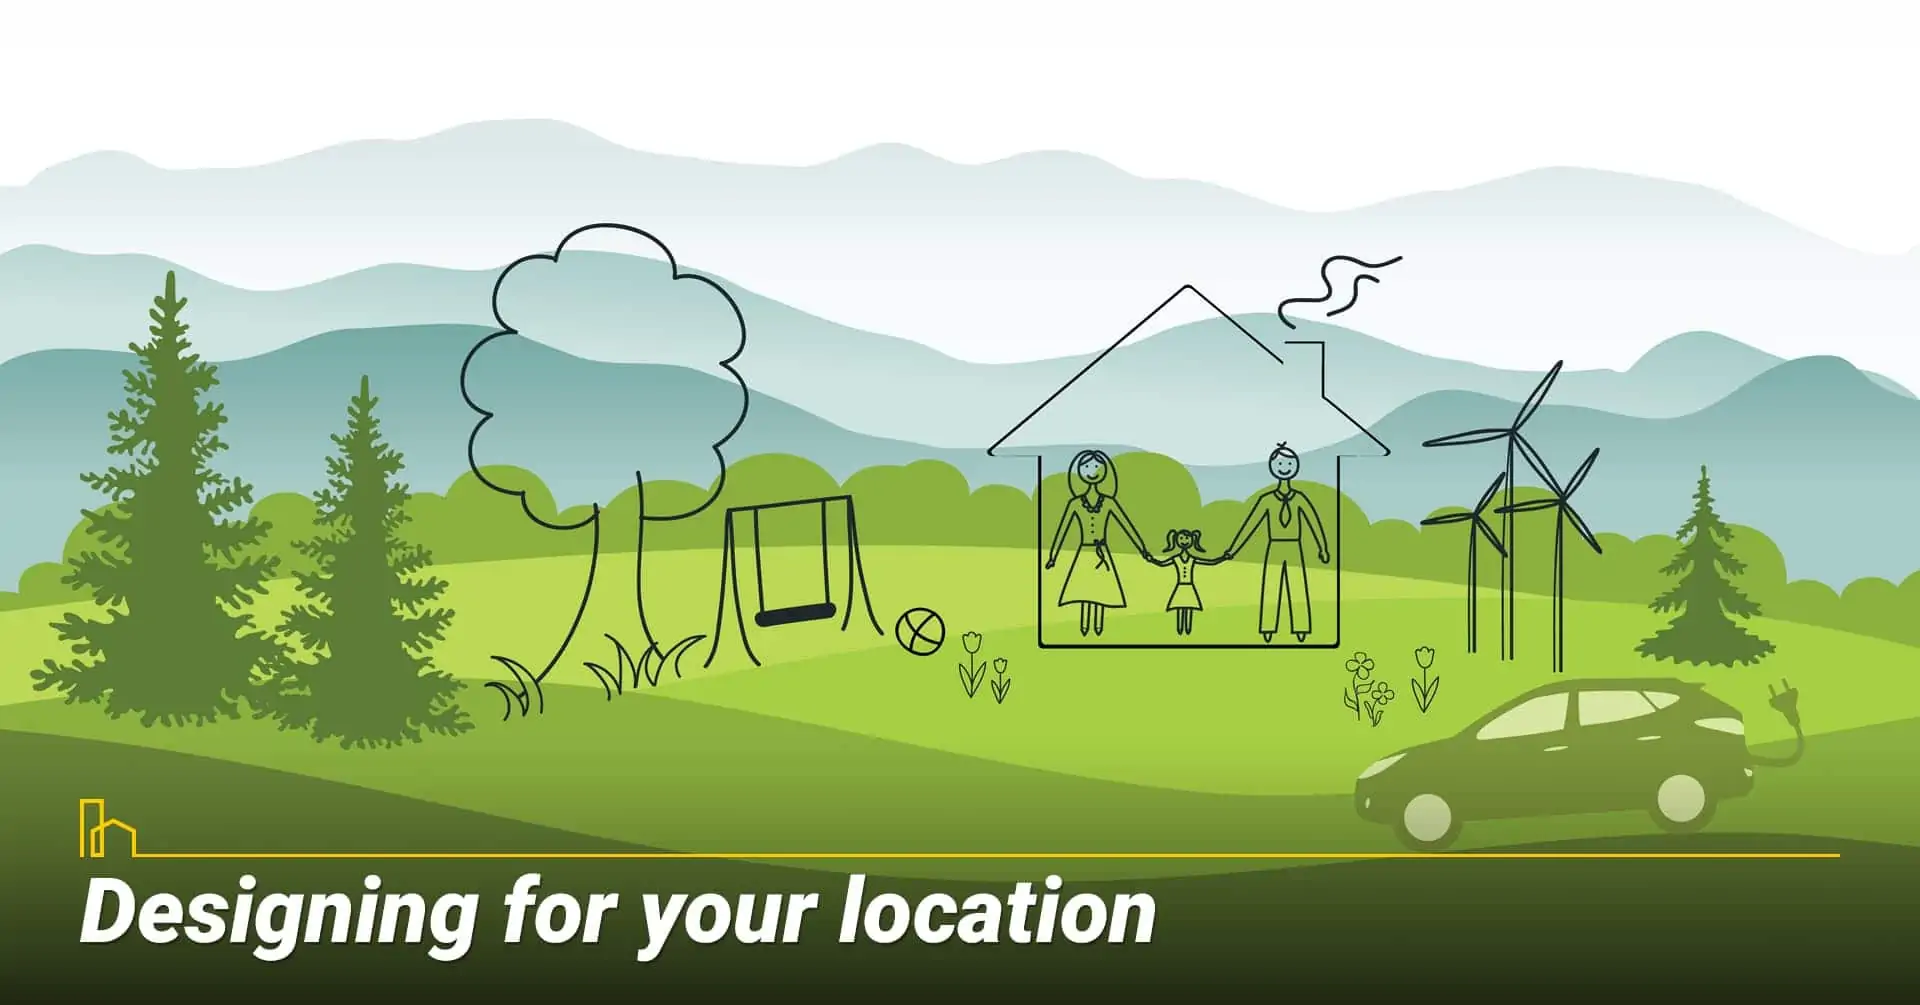 Designing for your location, consider the surrounding areas when design your home